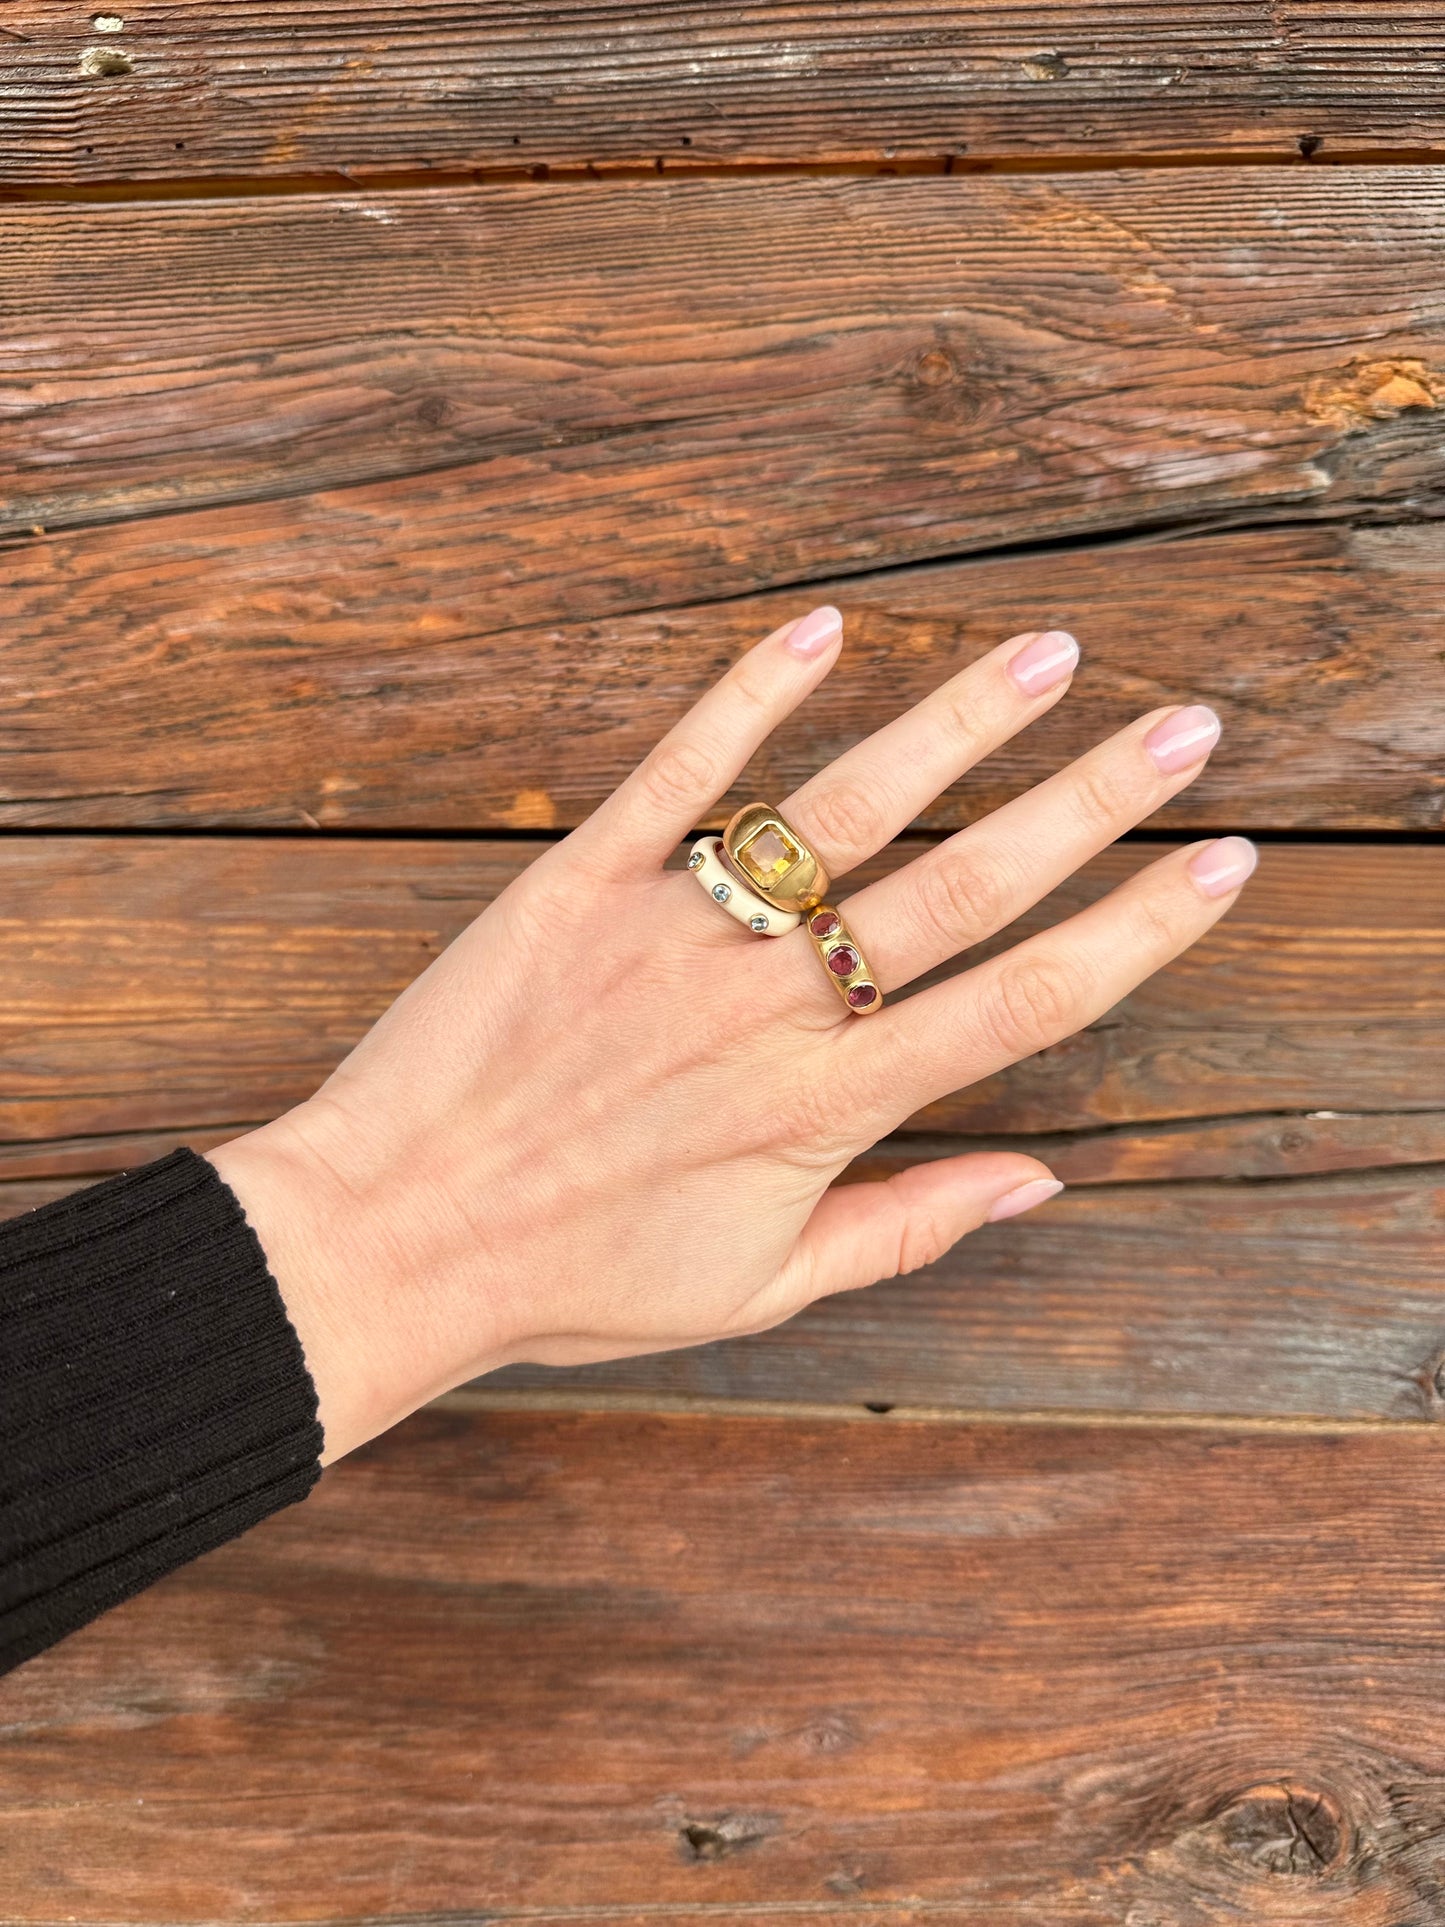 Kaja Erika Jorgensen 18k gold Rings, Uno Ring in combination with Wooly Ring and Octo Ring